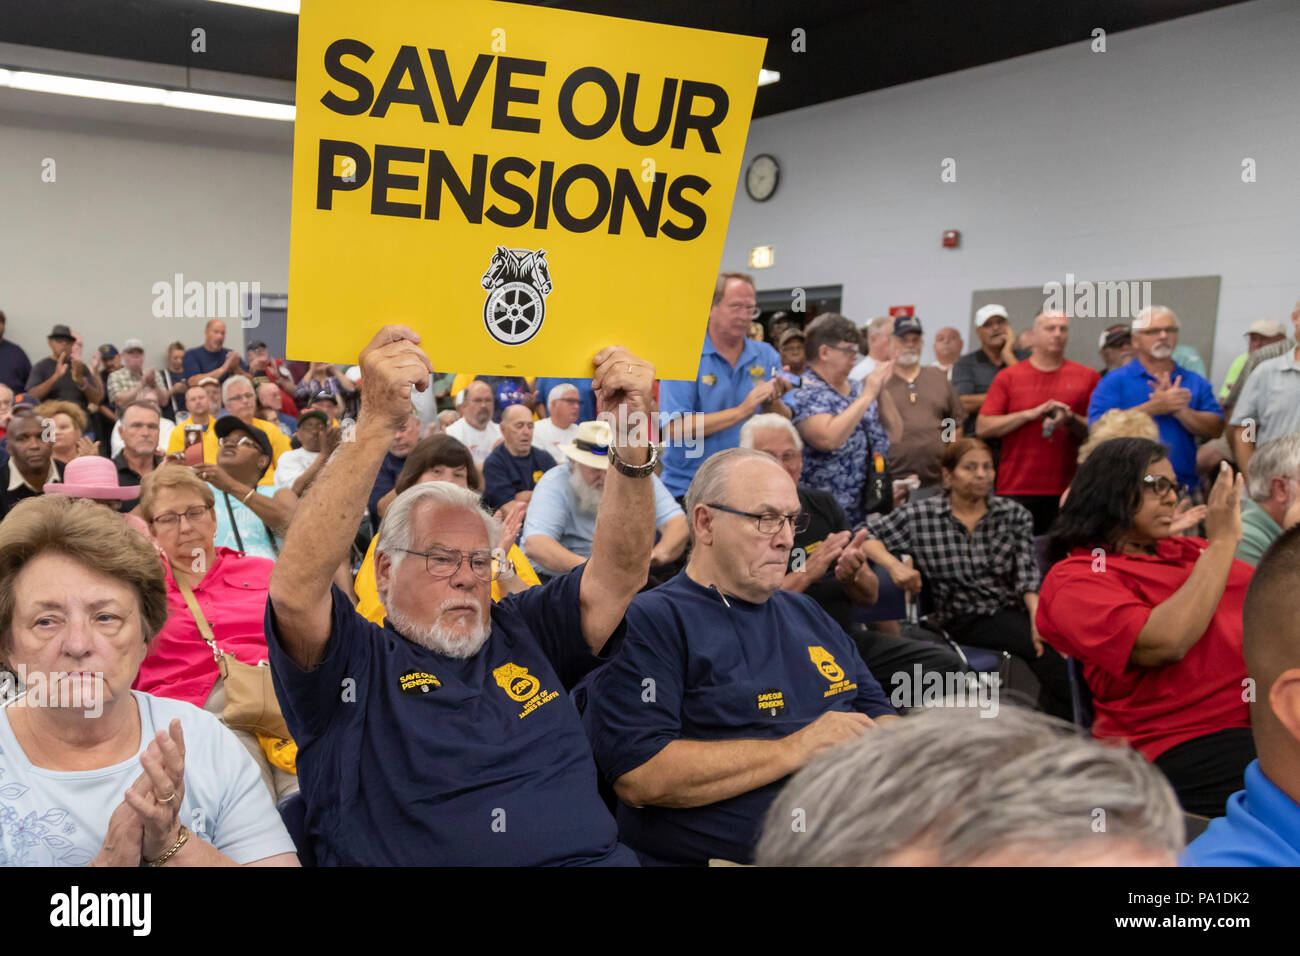 Detroit, Michigan USA - 20 July 2018 - Teamsters and members of other unions rally at a town hall meeting to save their pensions. More than 300 multiemployer pension plans across the country are in financial difficulty. The unions want Congress to pass the Butch Lewis Act to protect pension benefits. Credit: Jim West/Alamy Live News Stock Photo